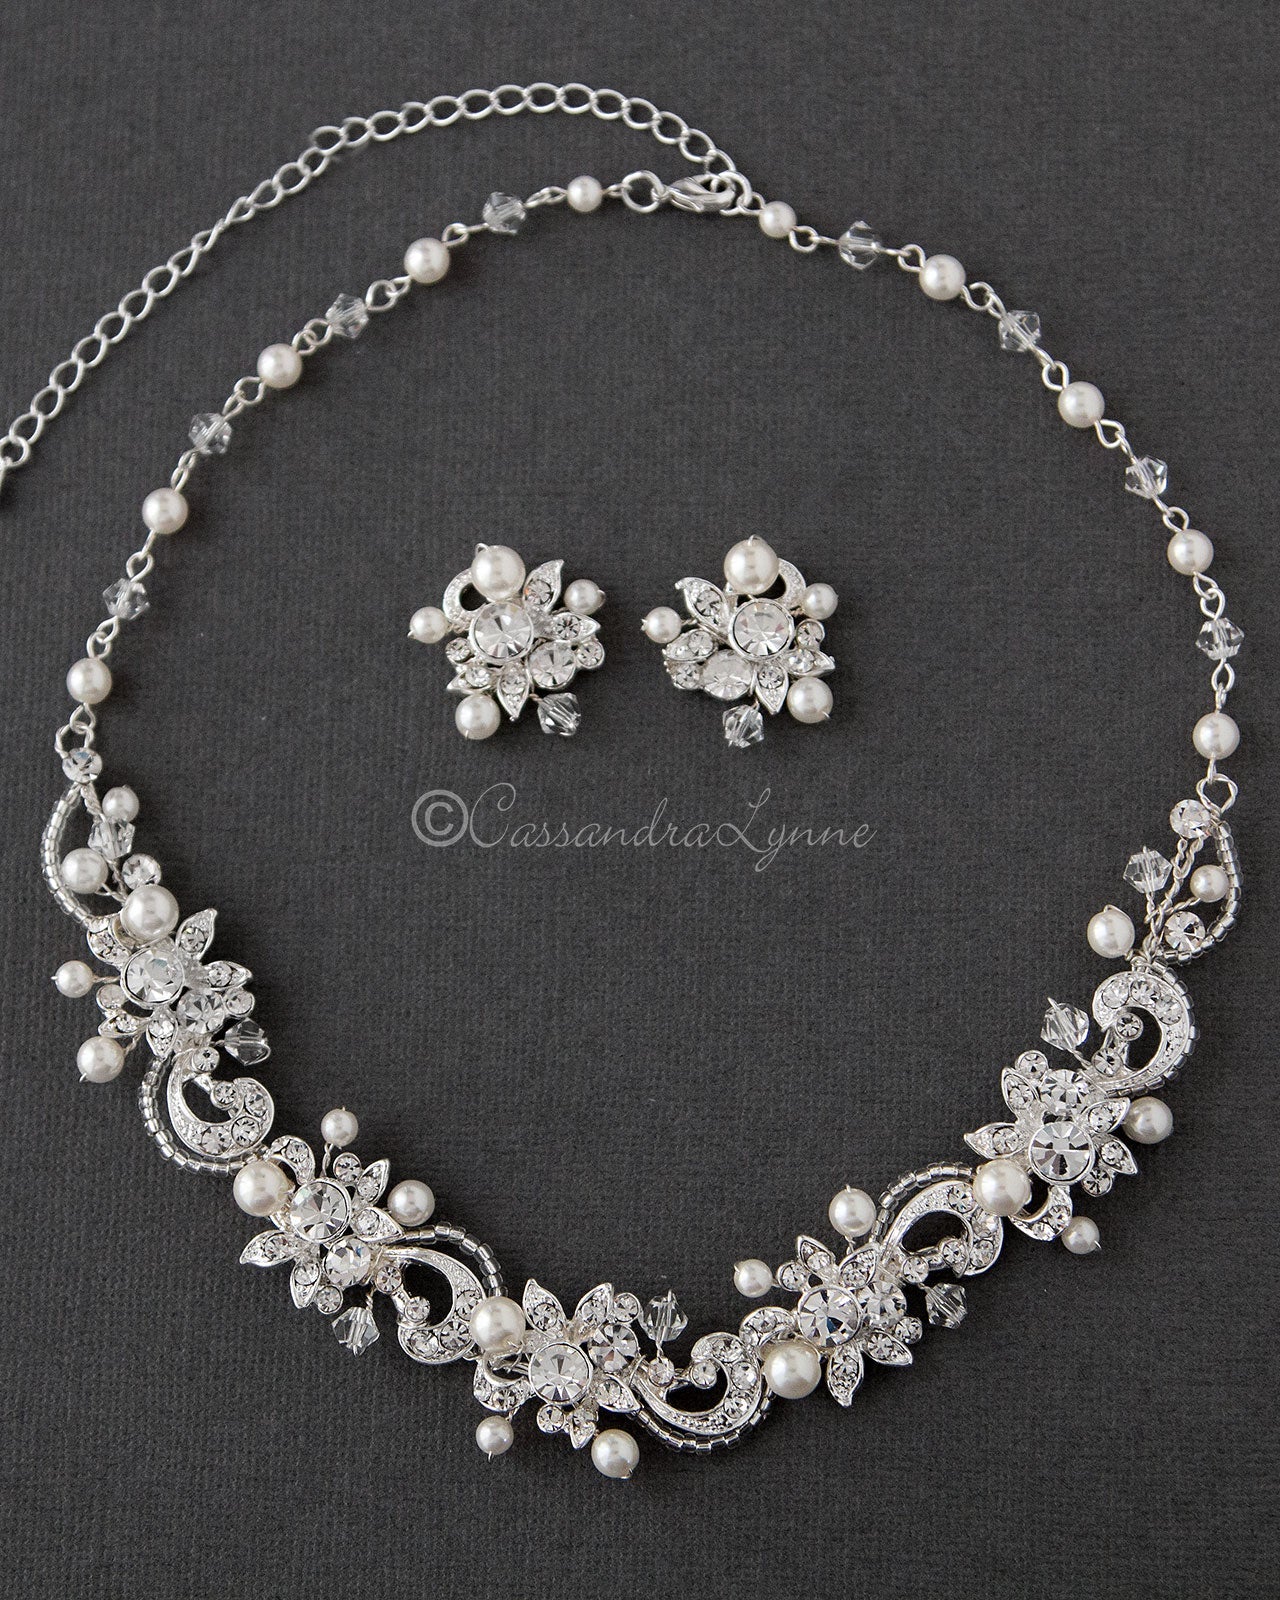 Crystal and Pearl Bridal Necklace Set - Cassandra Lynne